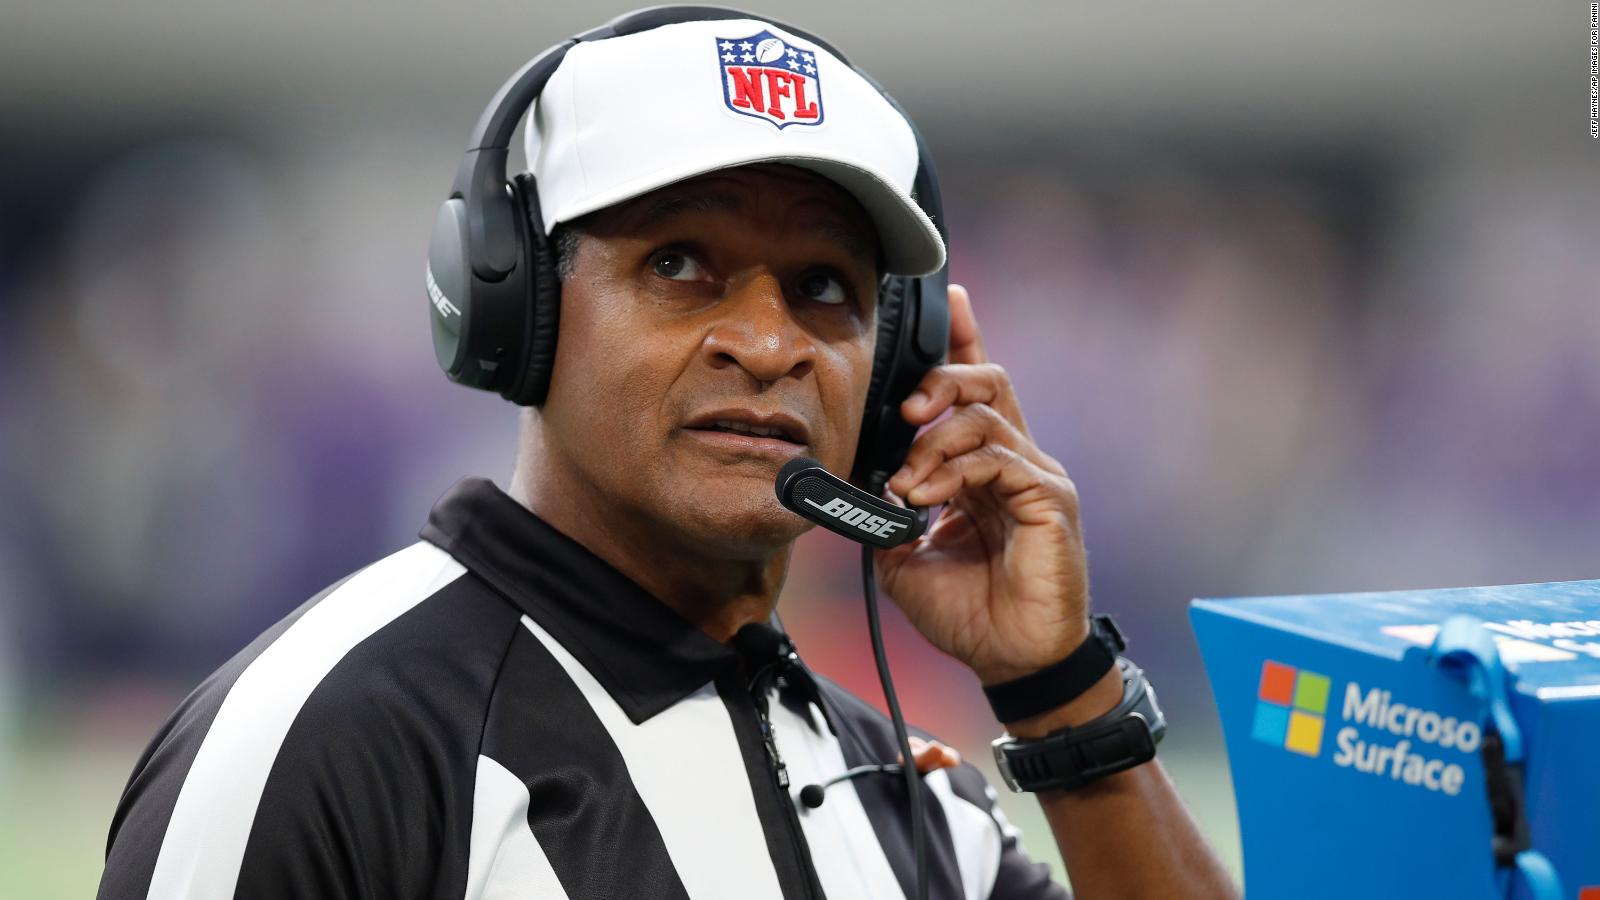 First allBlack crew to make history officiating an NFL game CNN